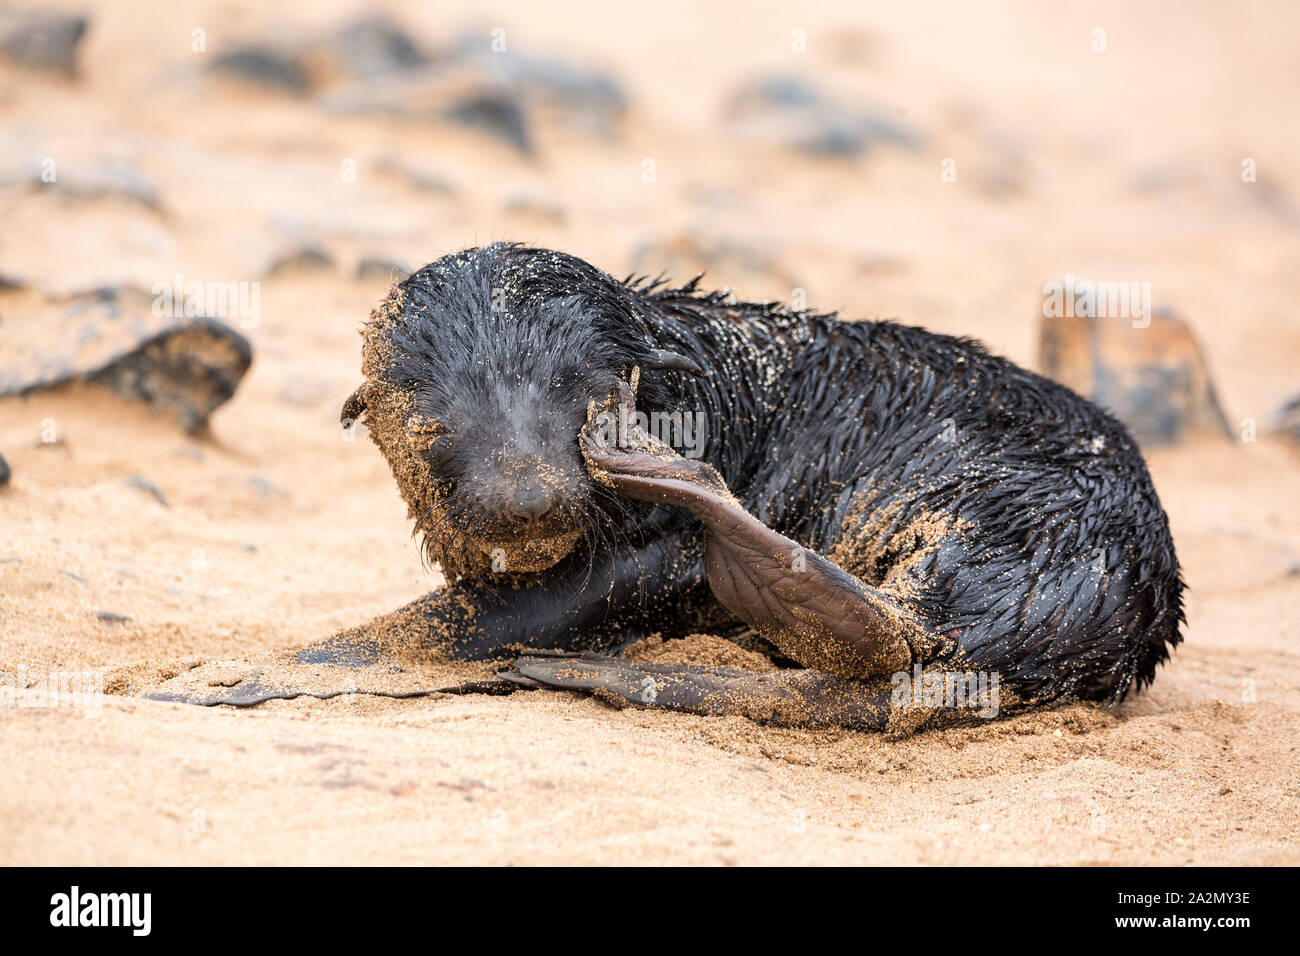 South African Fur Seal baby scratching at Cape Cross Seal Reserve, Namibia, Africa Stock Photo